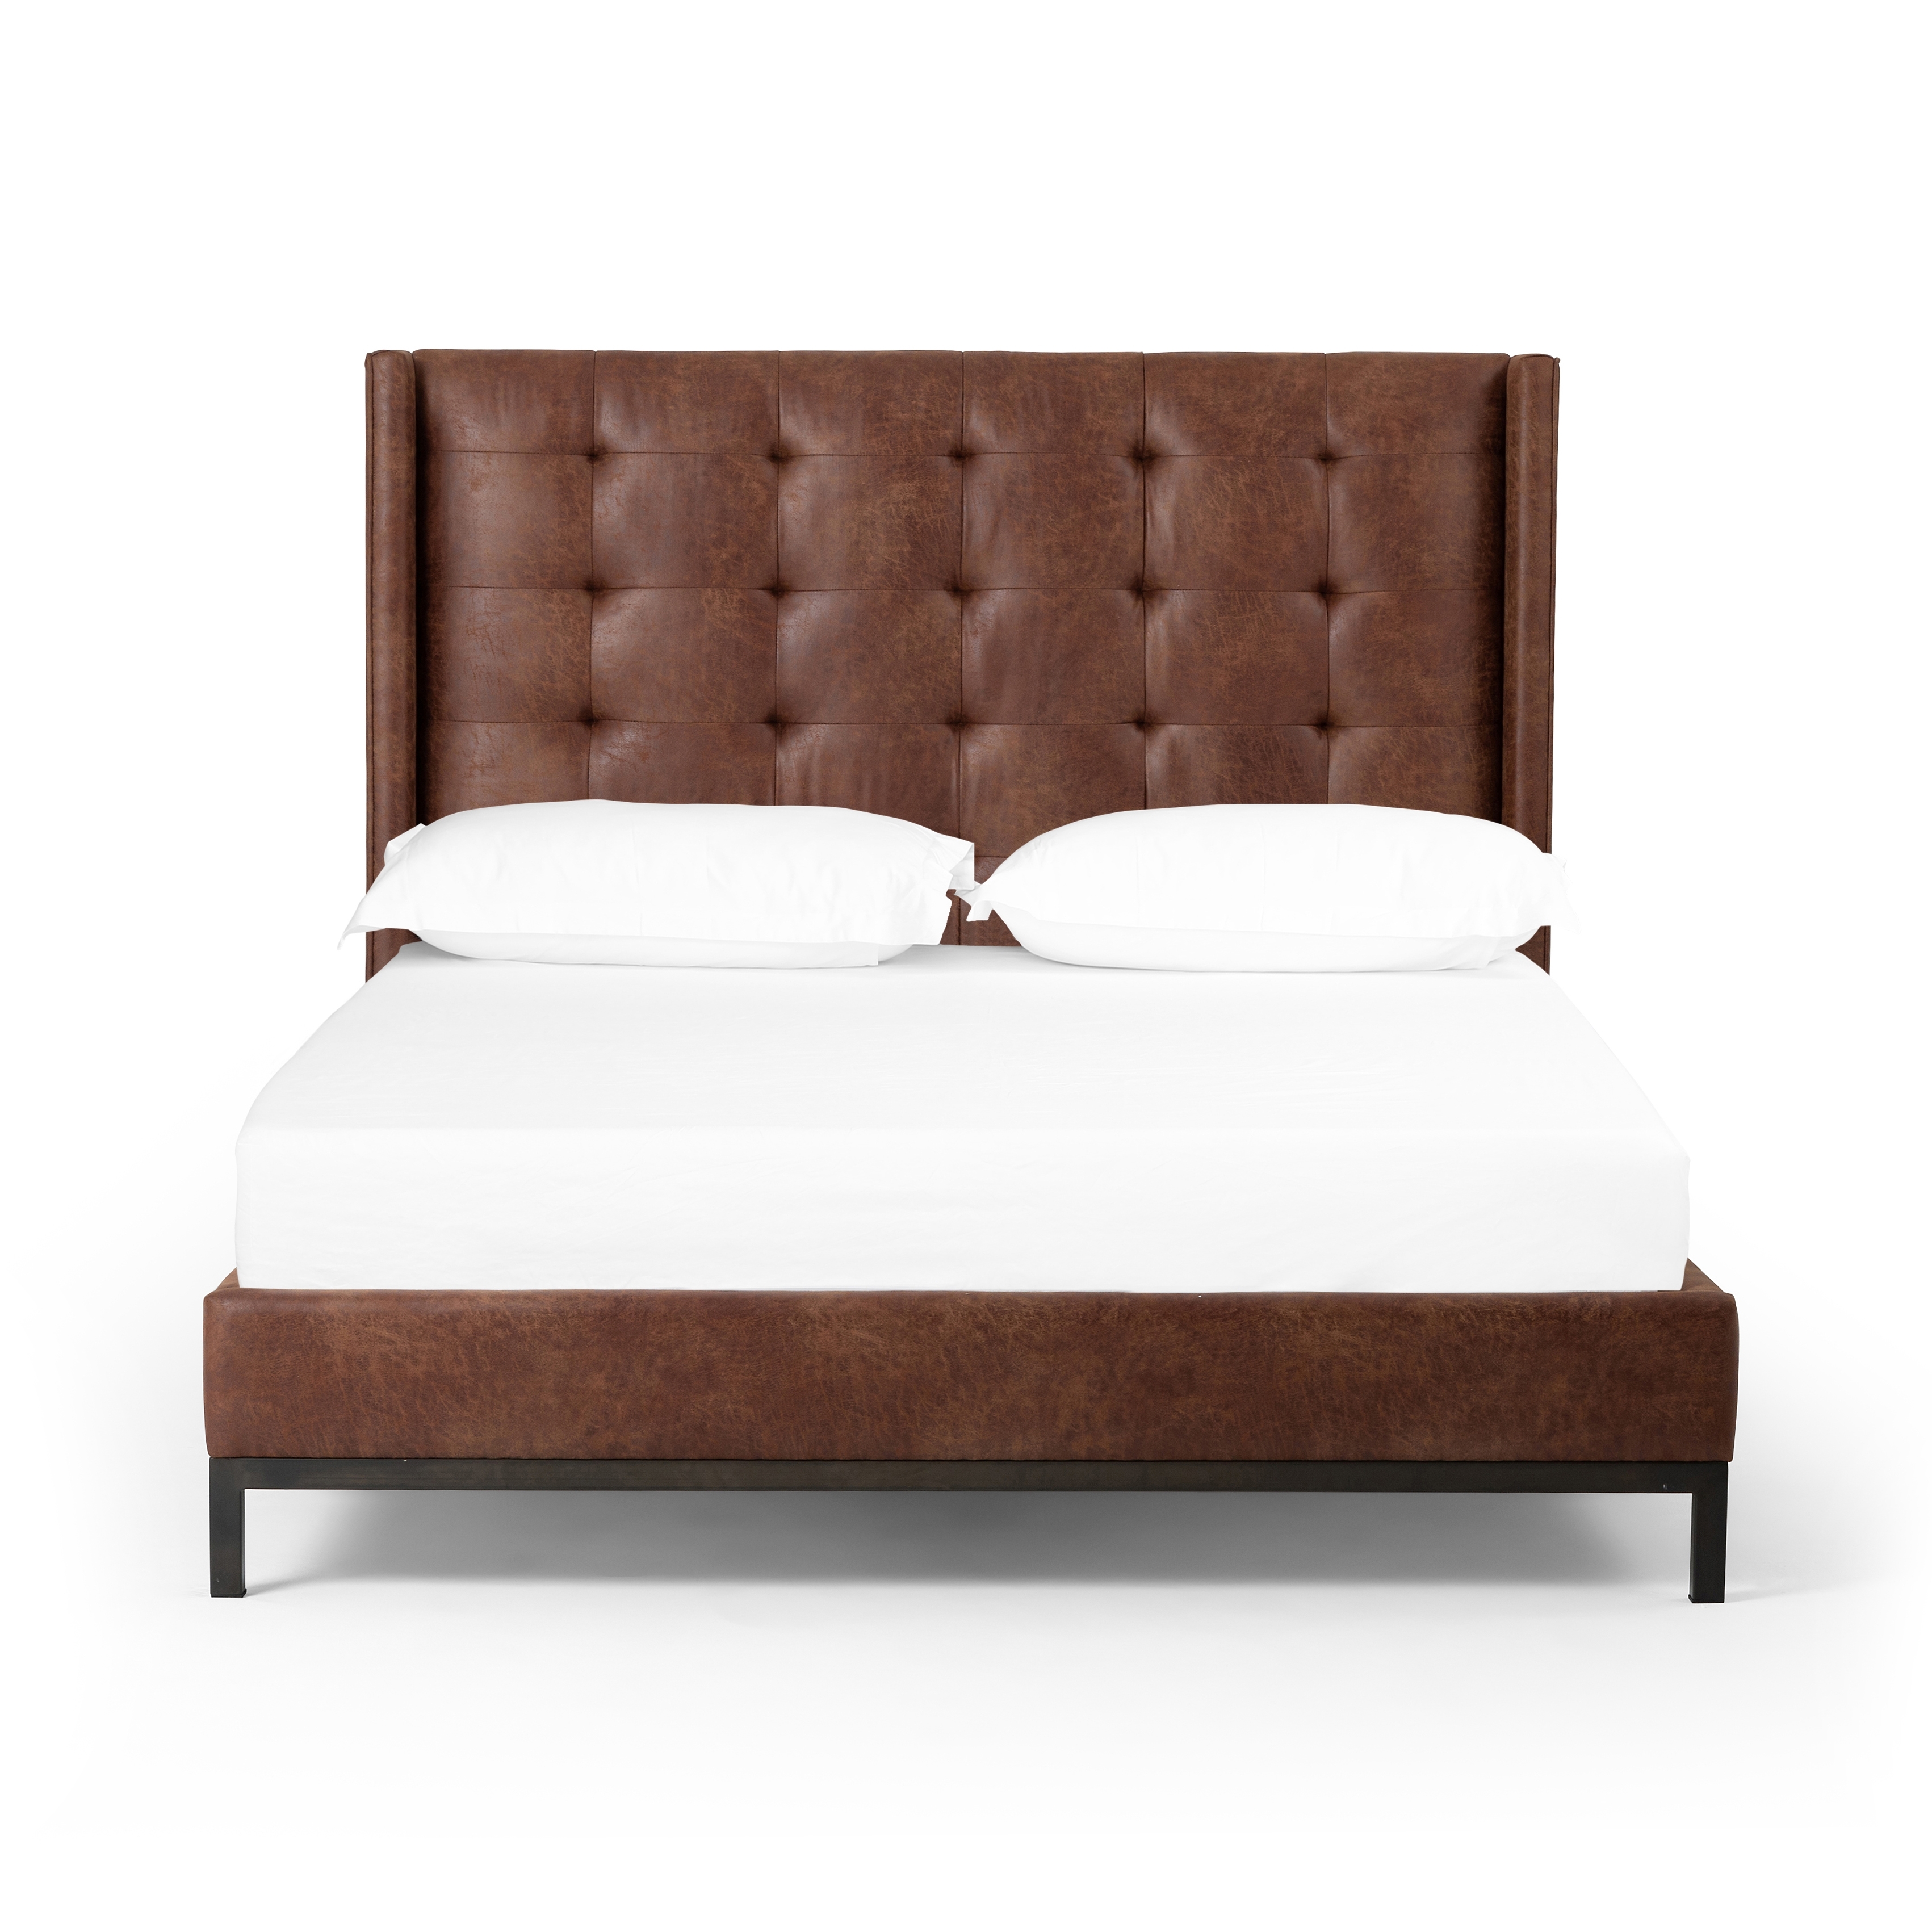 Newhall Bed - 55" - Vintage Tobacco - Image 2